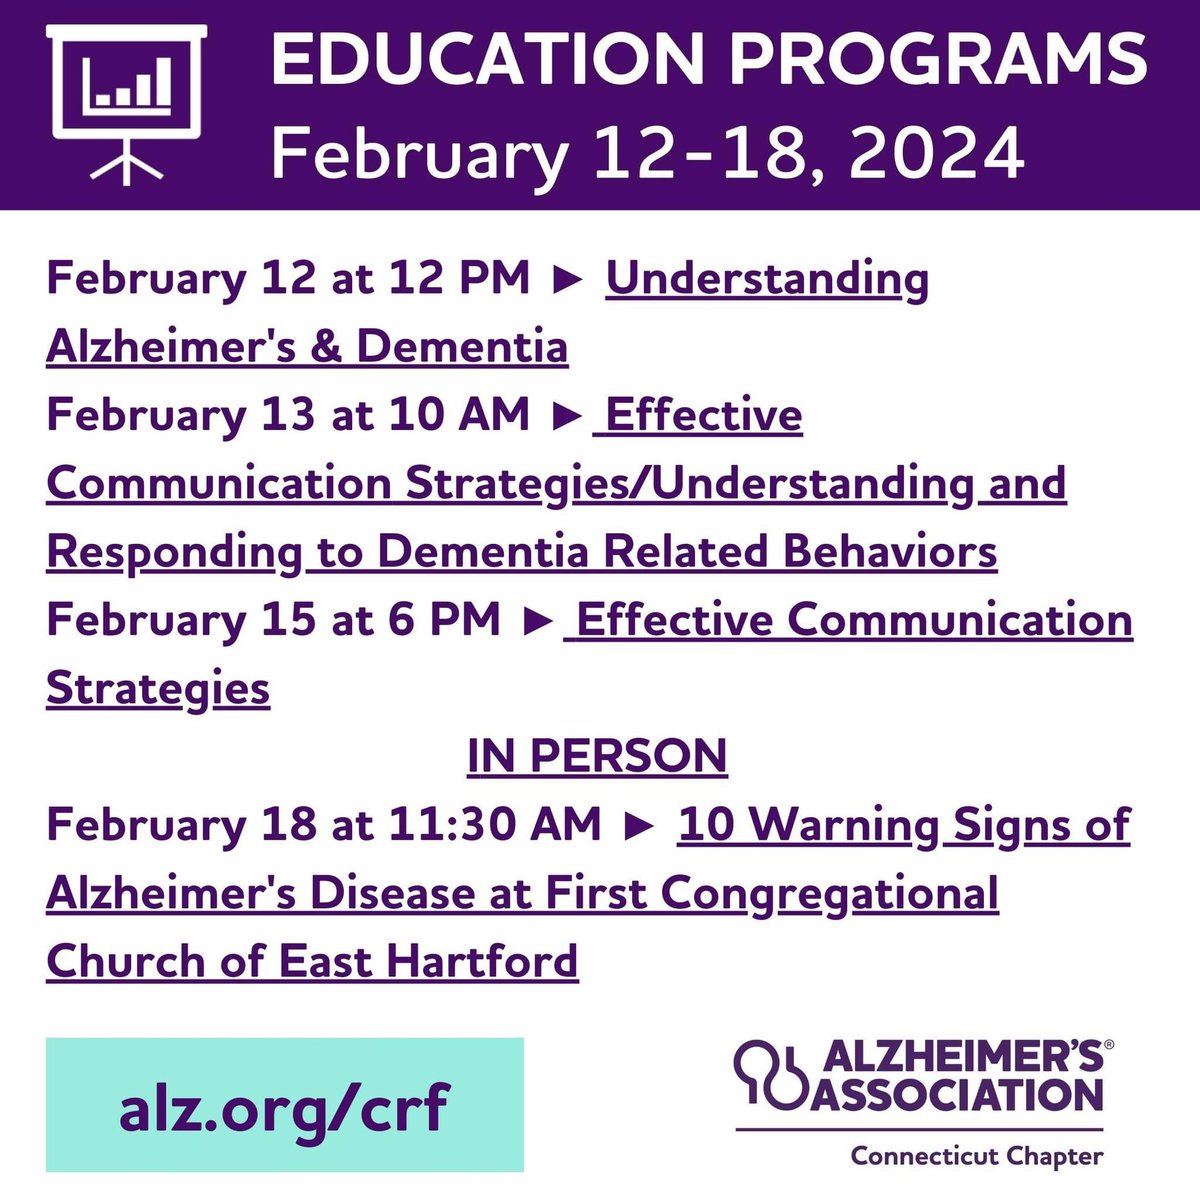 Good Monday to you. Here are some programs for the week ahead. Some virtual and some in person. You can register by heading to alz.org/crf or call 1.800.272.3900.